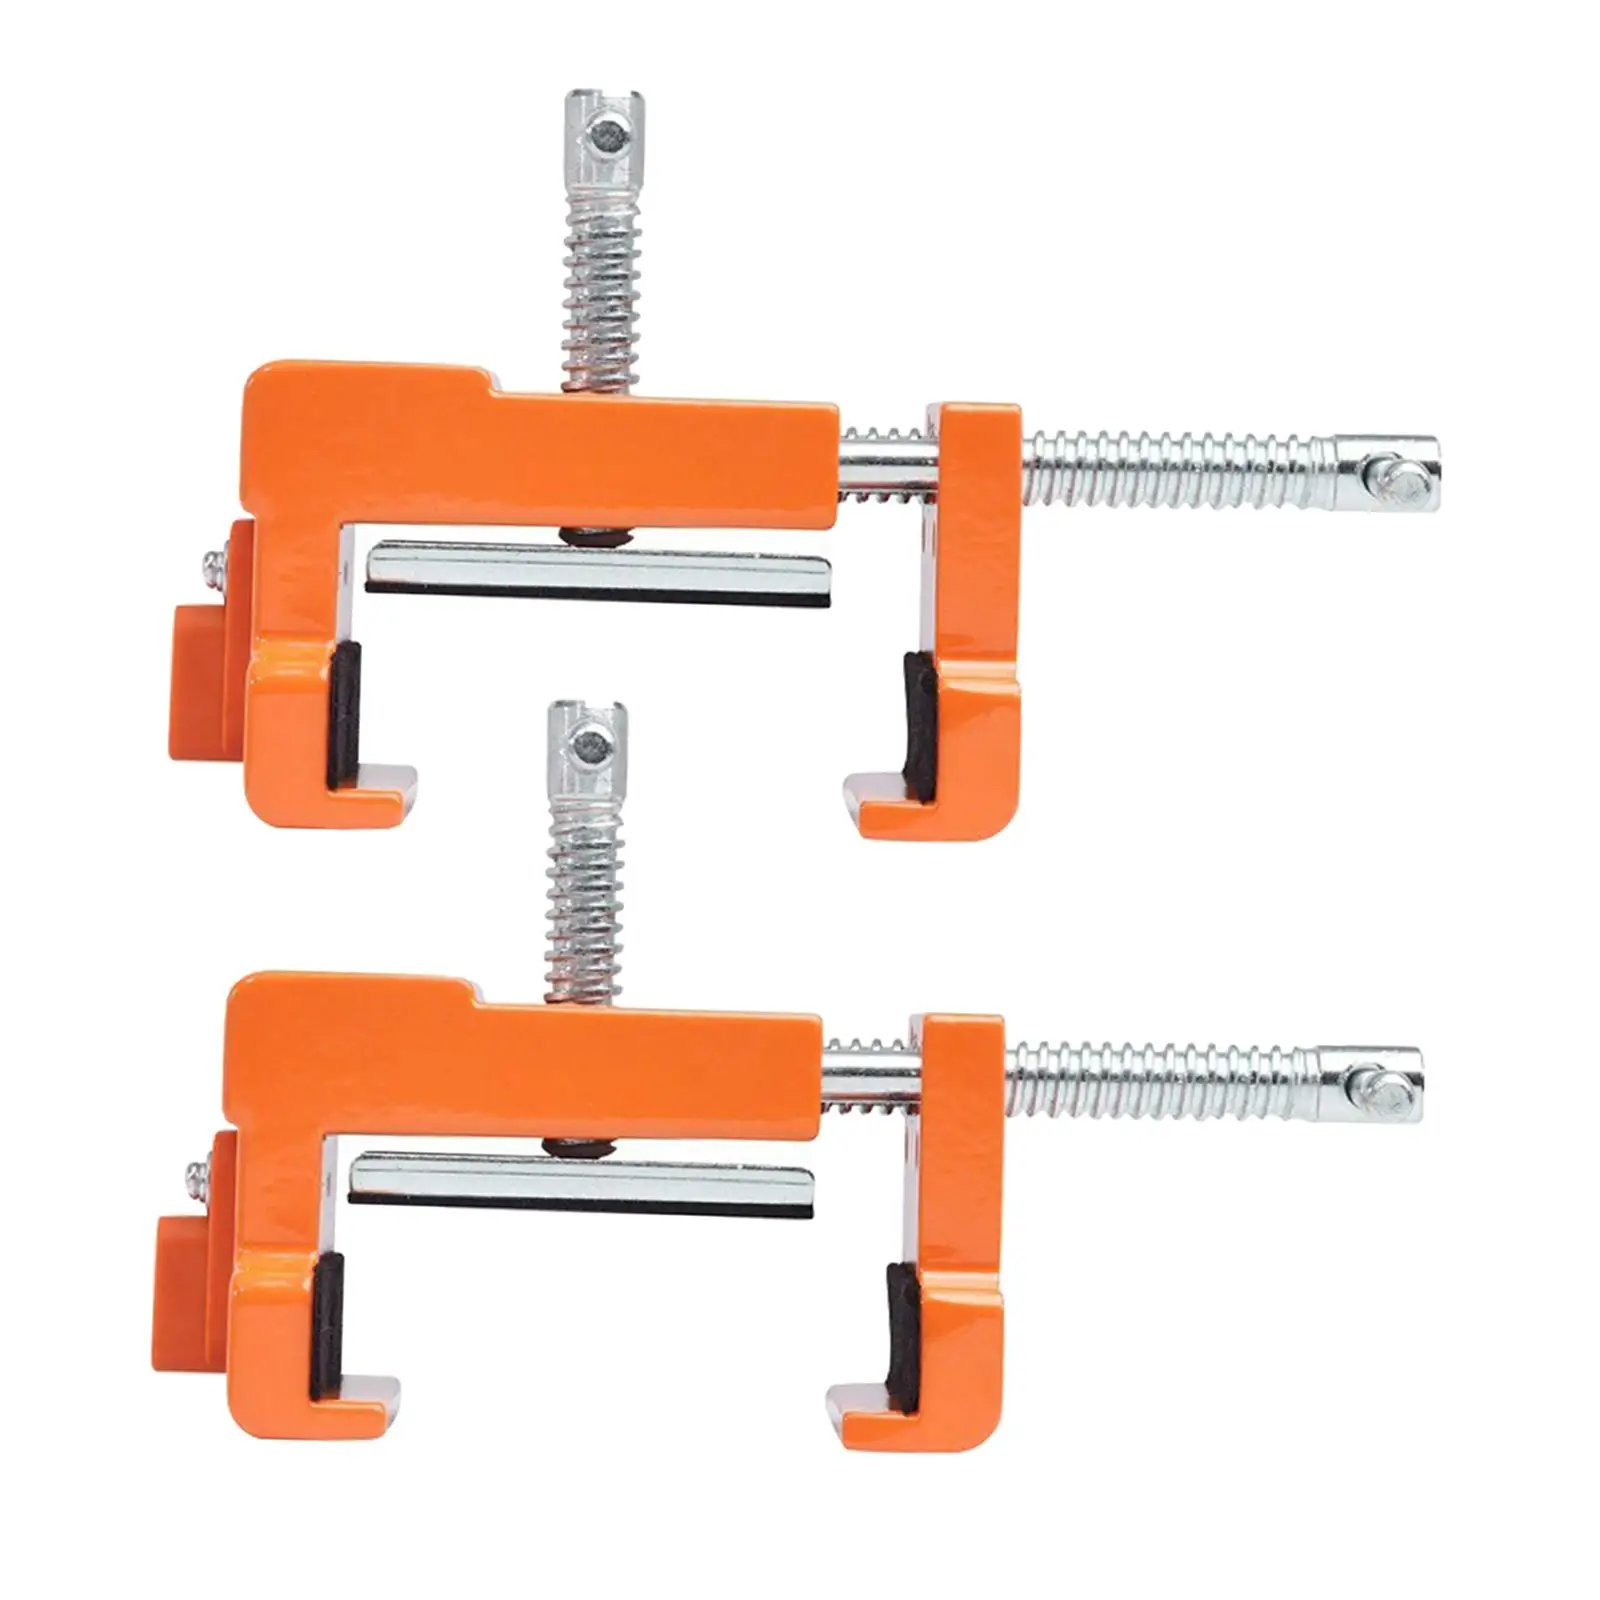 2Pcs Cabinetry Clamps, Two Side Screws and Alignment Plate Installing Cabinets Hand Tools, Cabinet Installation Clamps